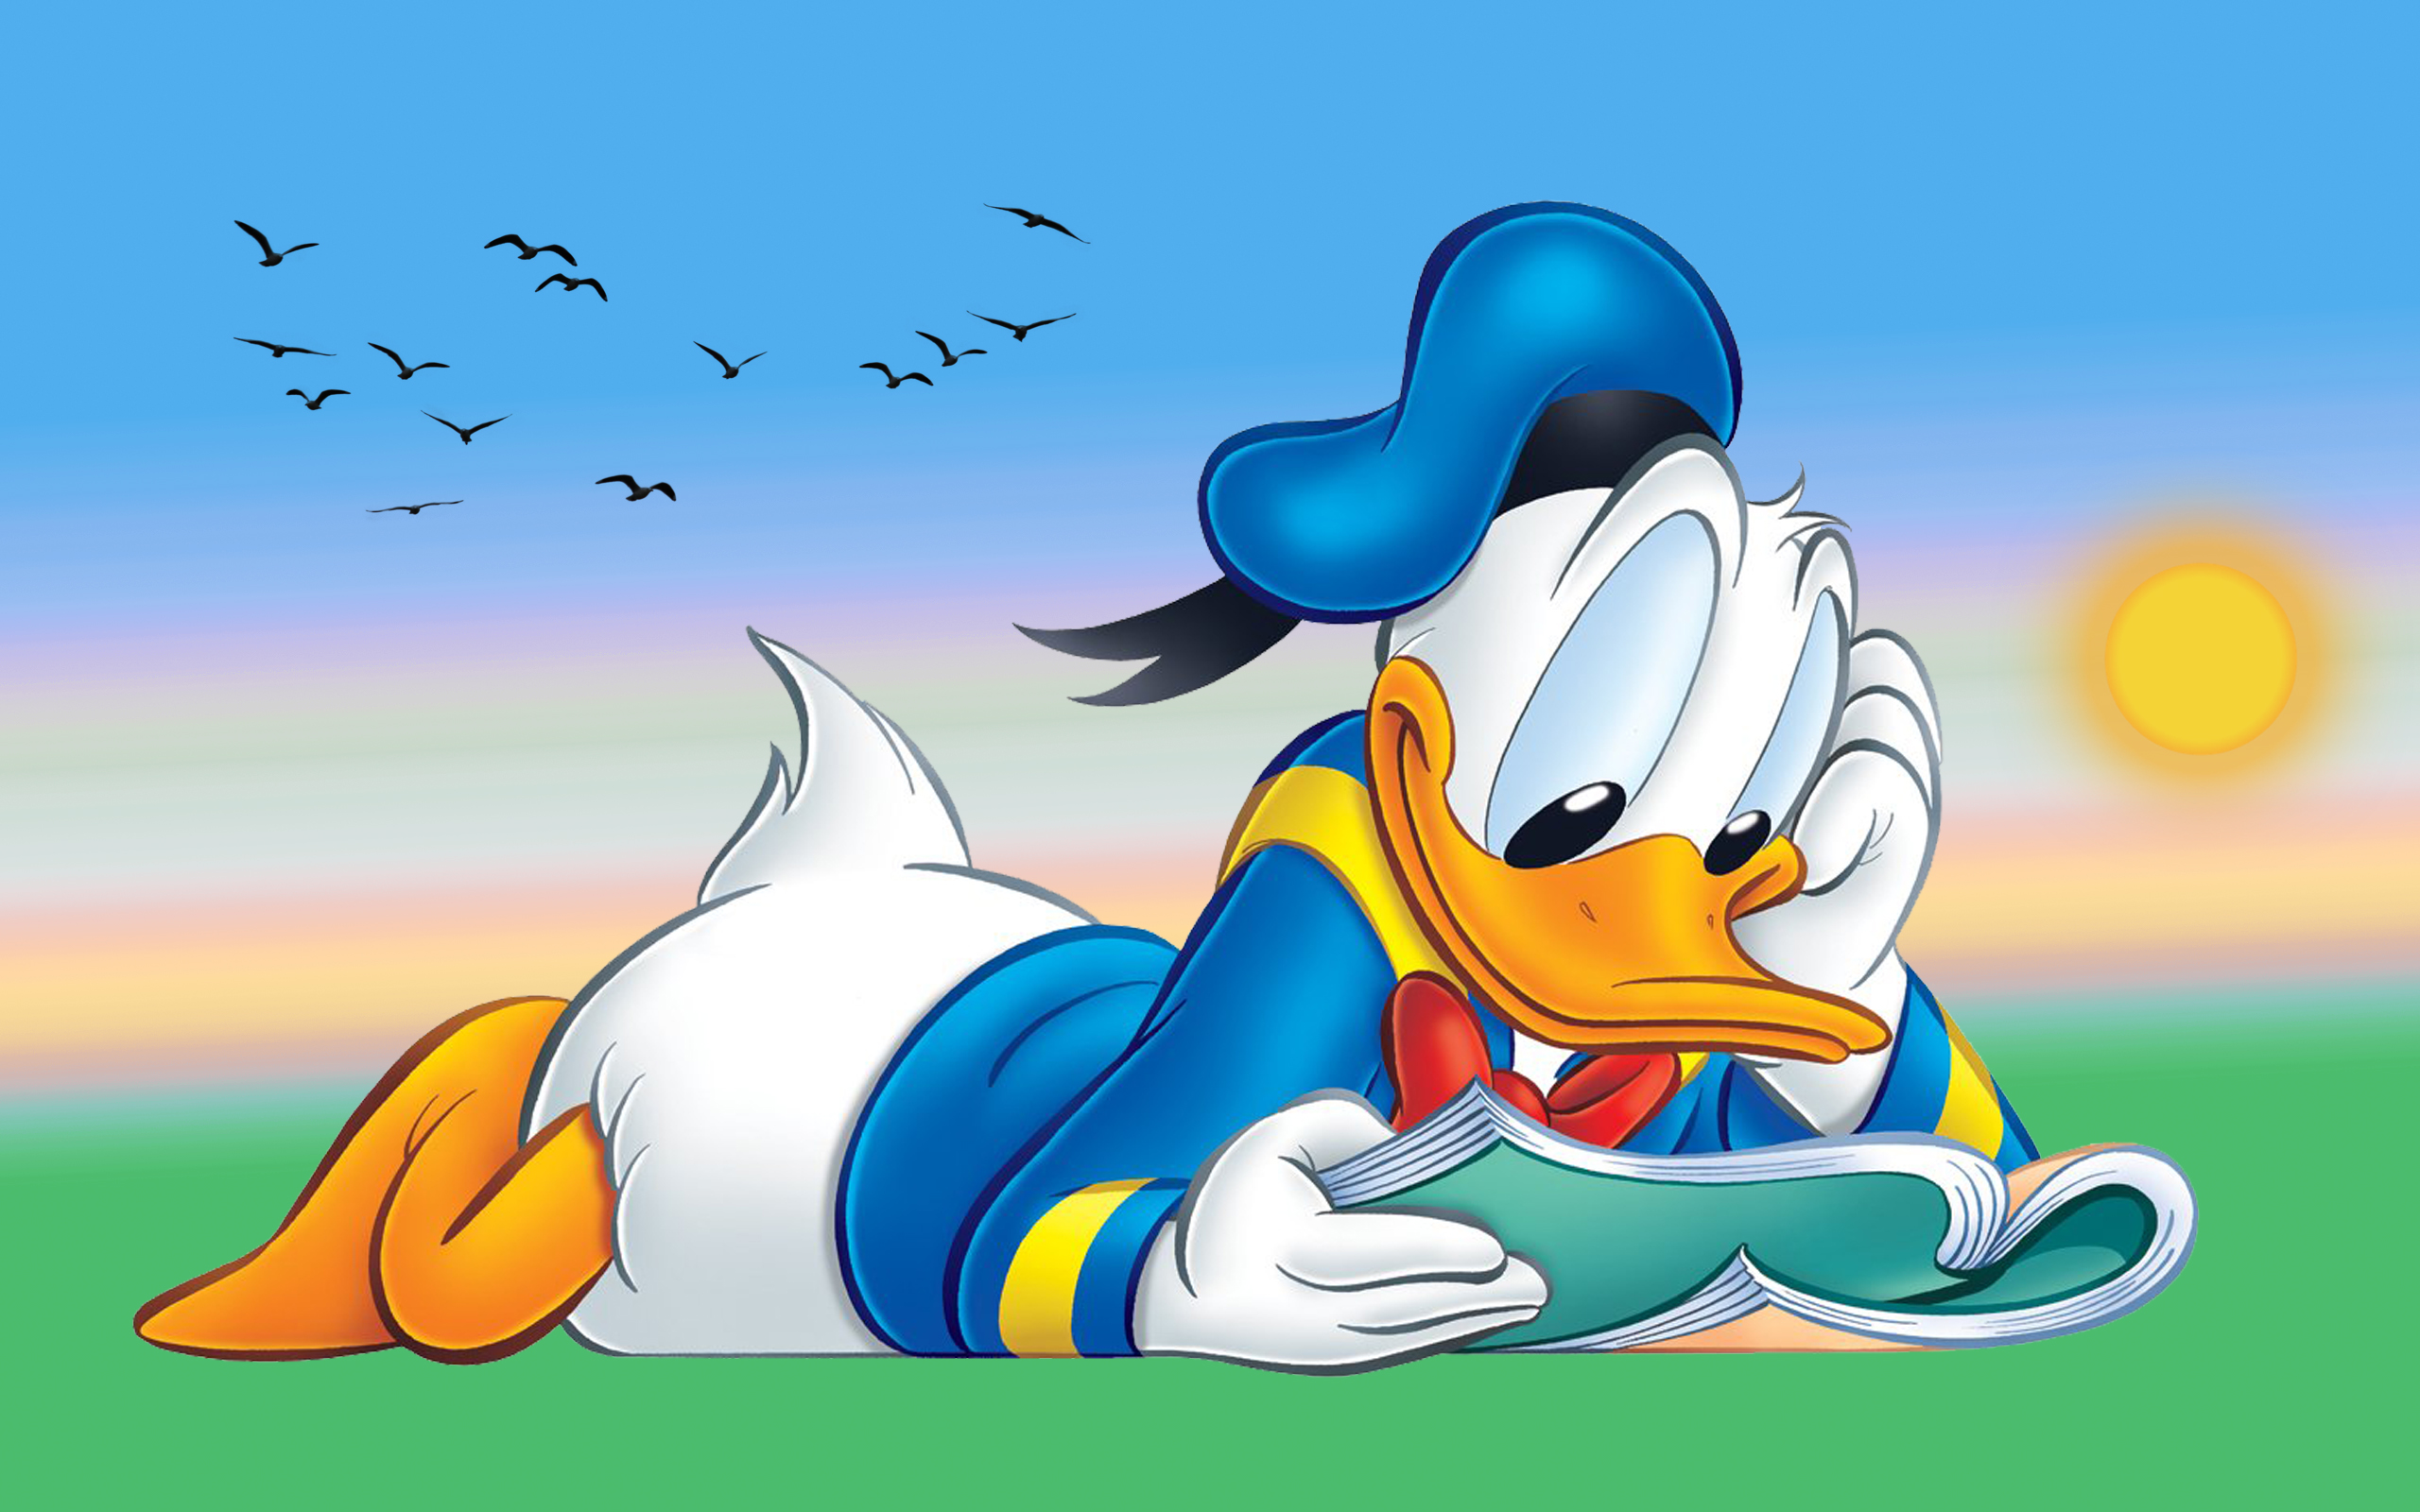 Donald Duck Cartoon Reading Book Desktop Hd Wallpapers For Tablet And PC 25...